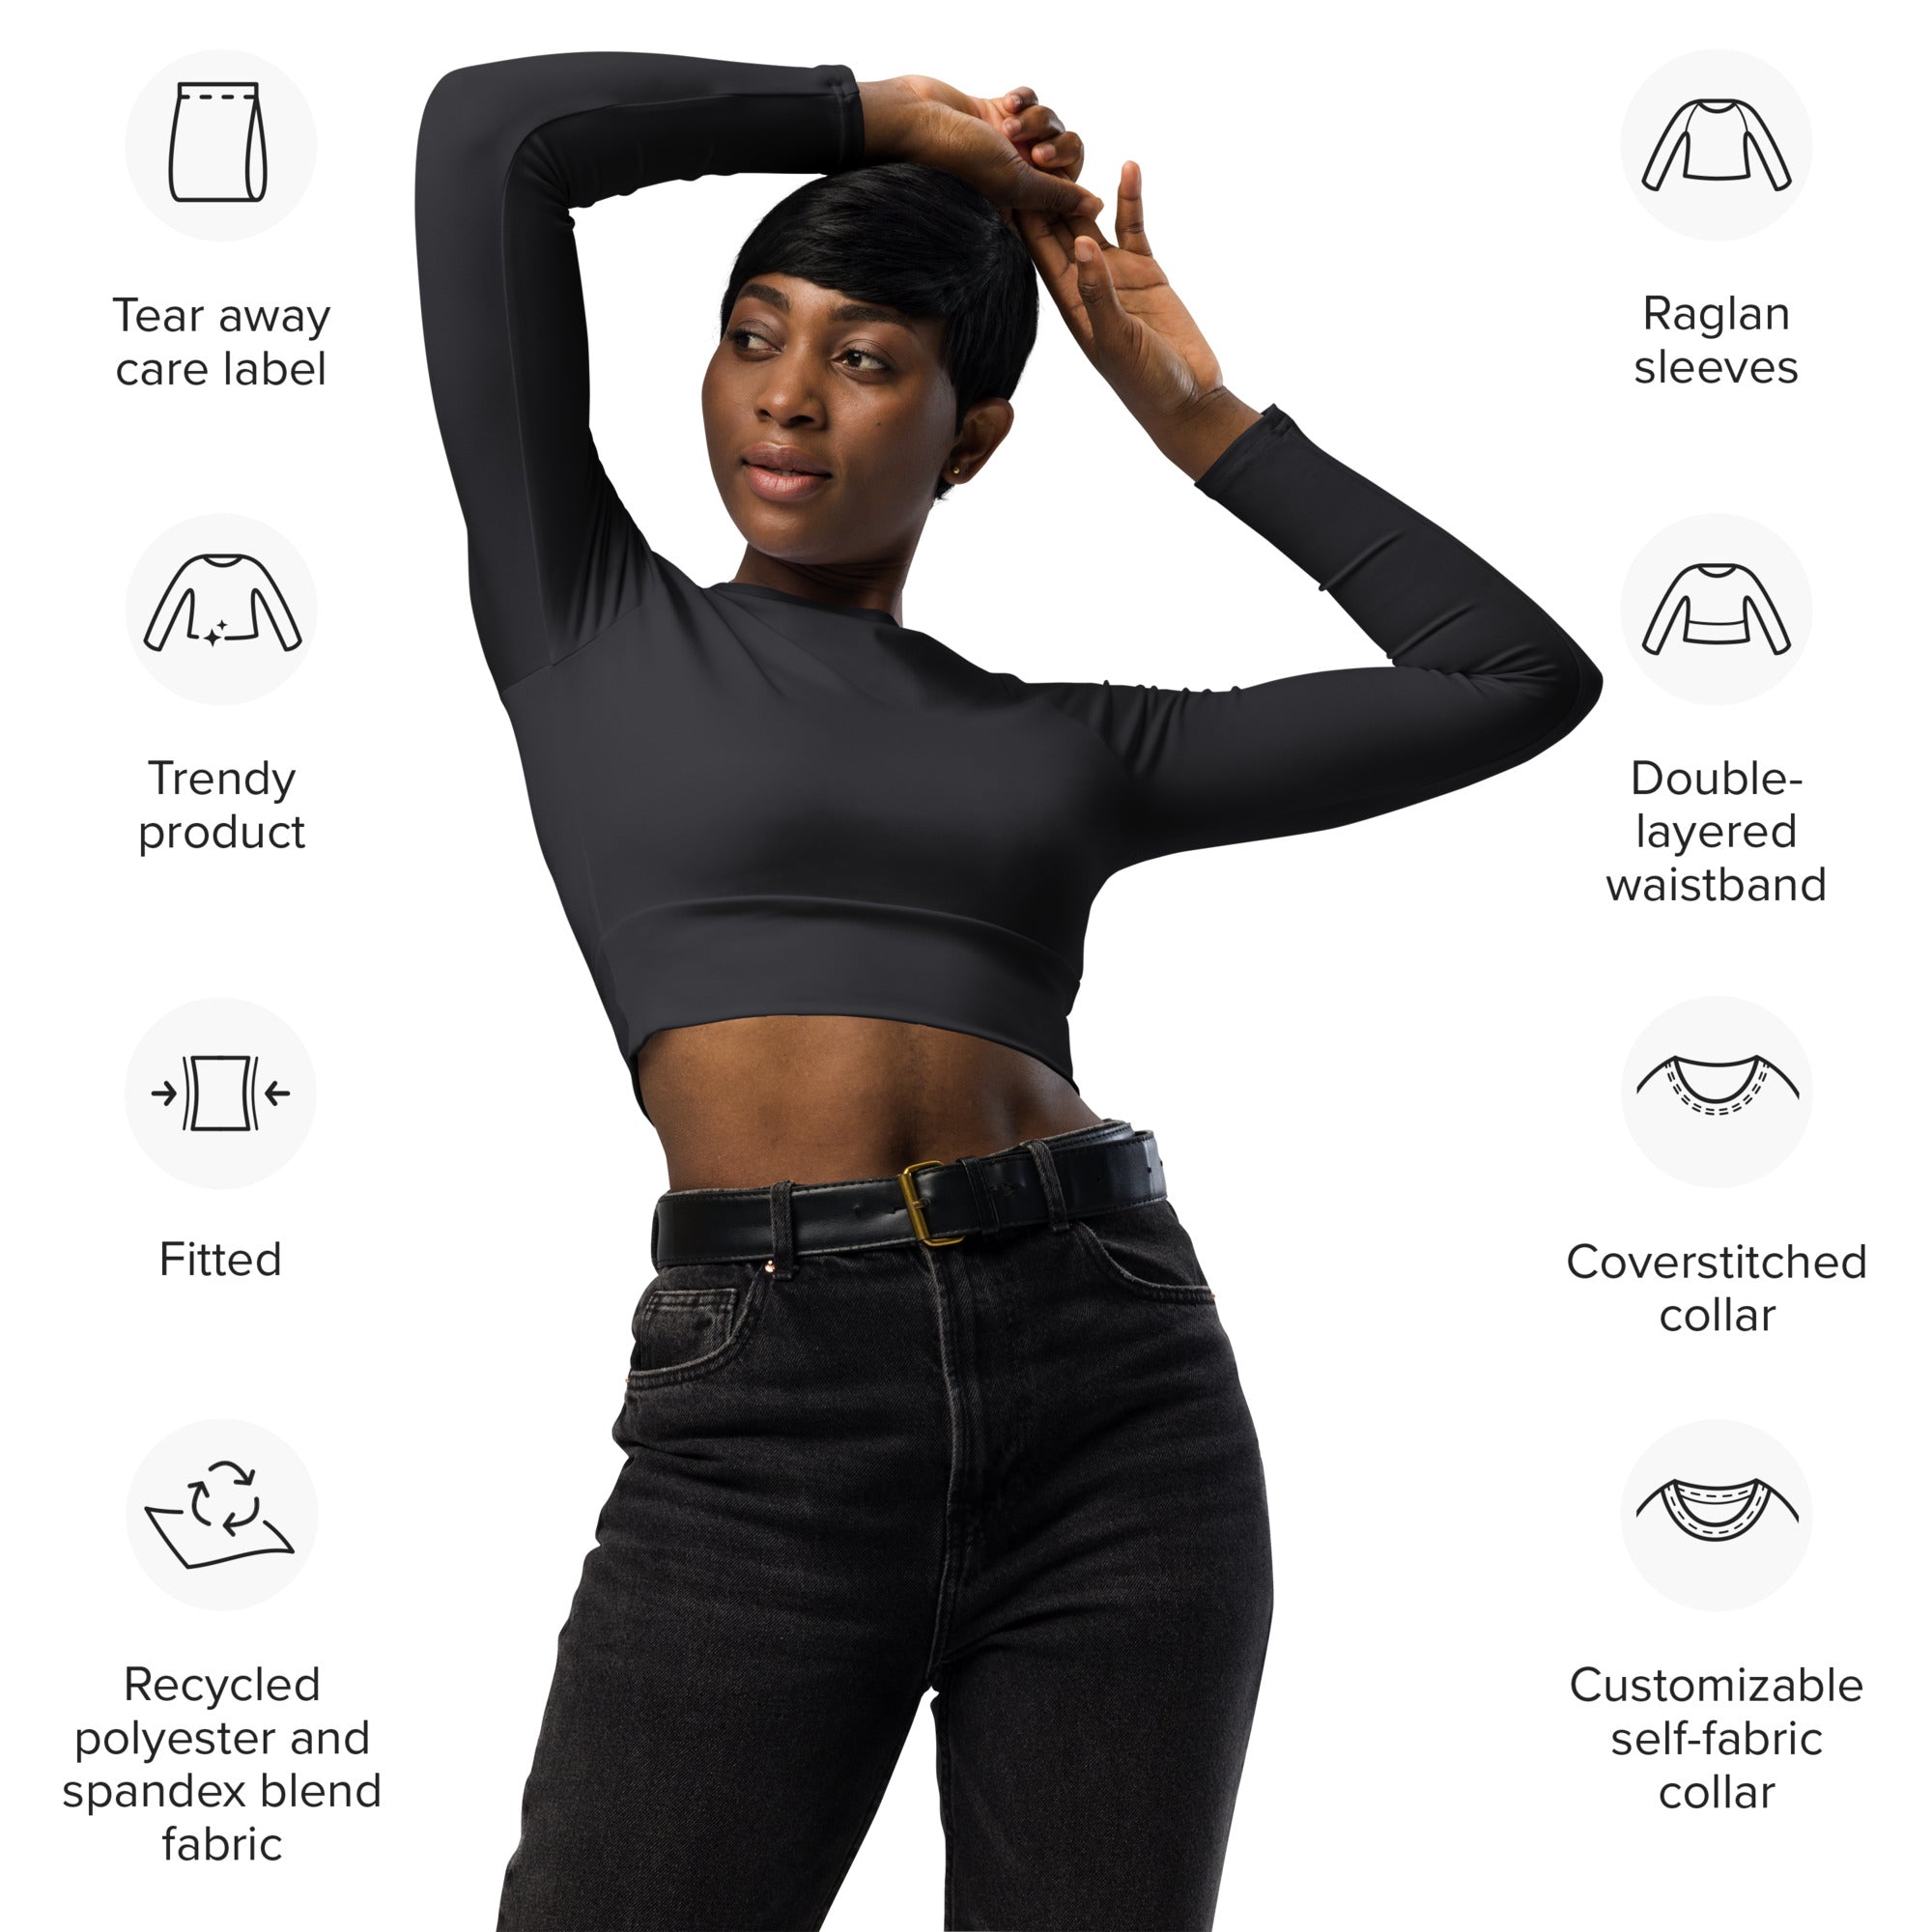 Charcoal Light Gray Recycled Long-sleeve Crop Top